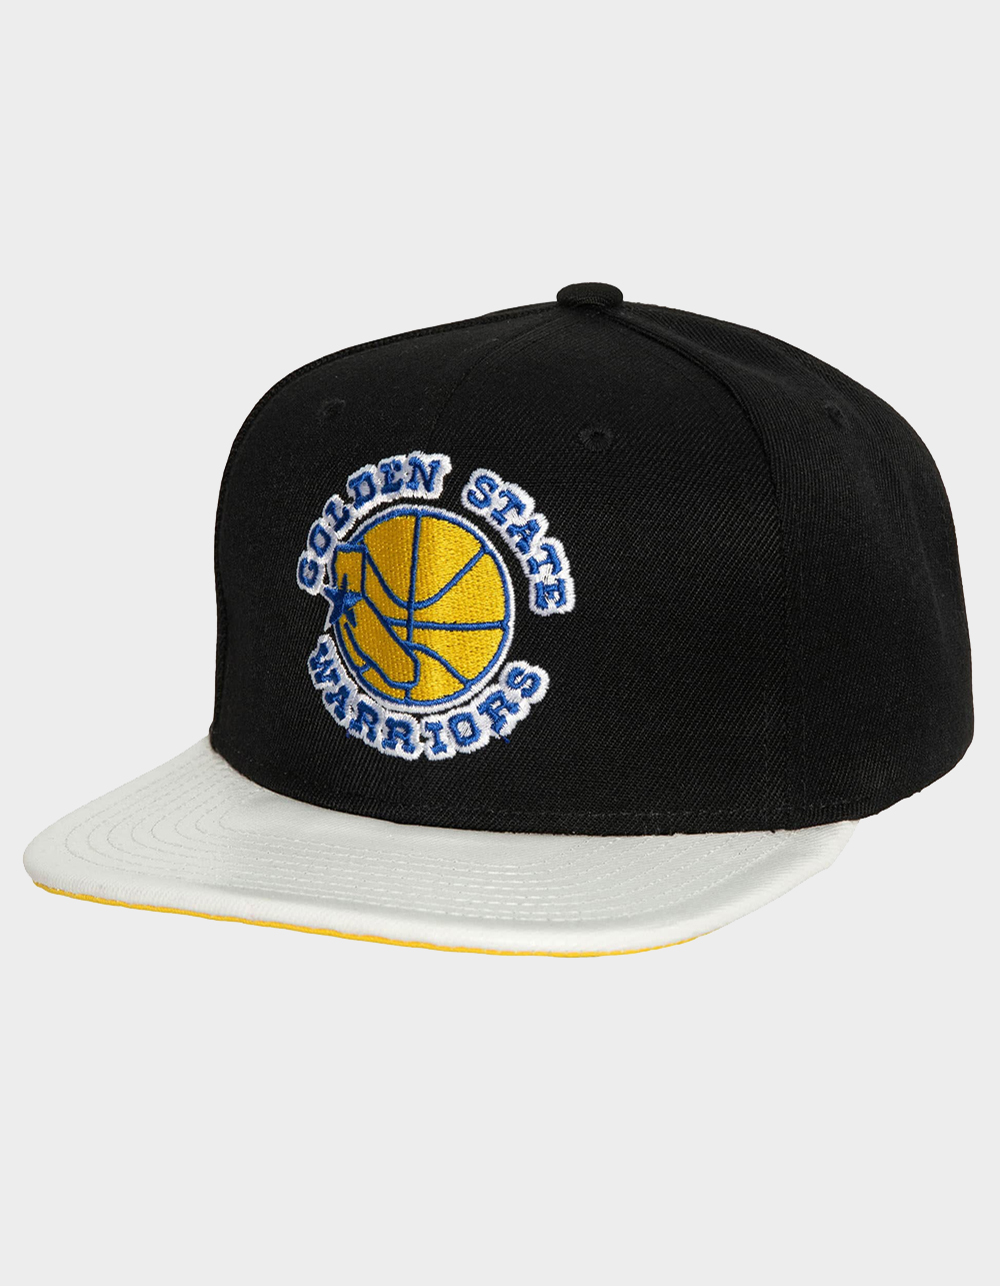  Mitchell & Ness Men's Golden State Warriors Snapback One Size  Blue : Sports & Outdoors